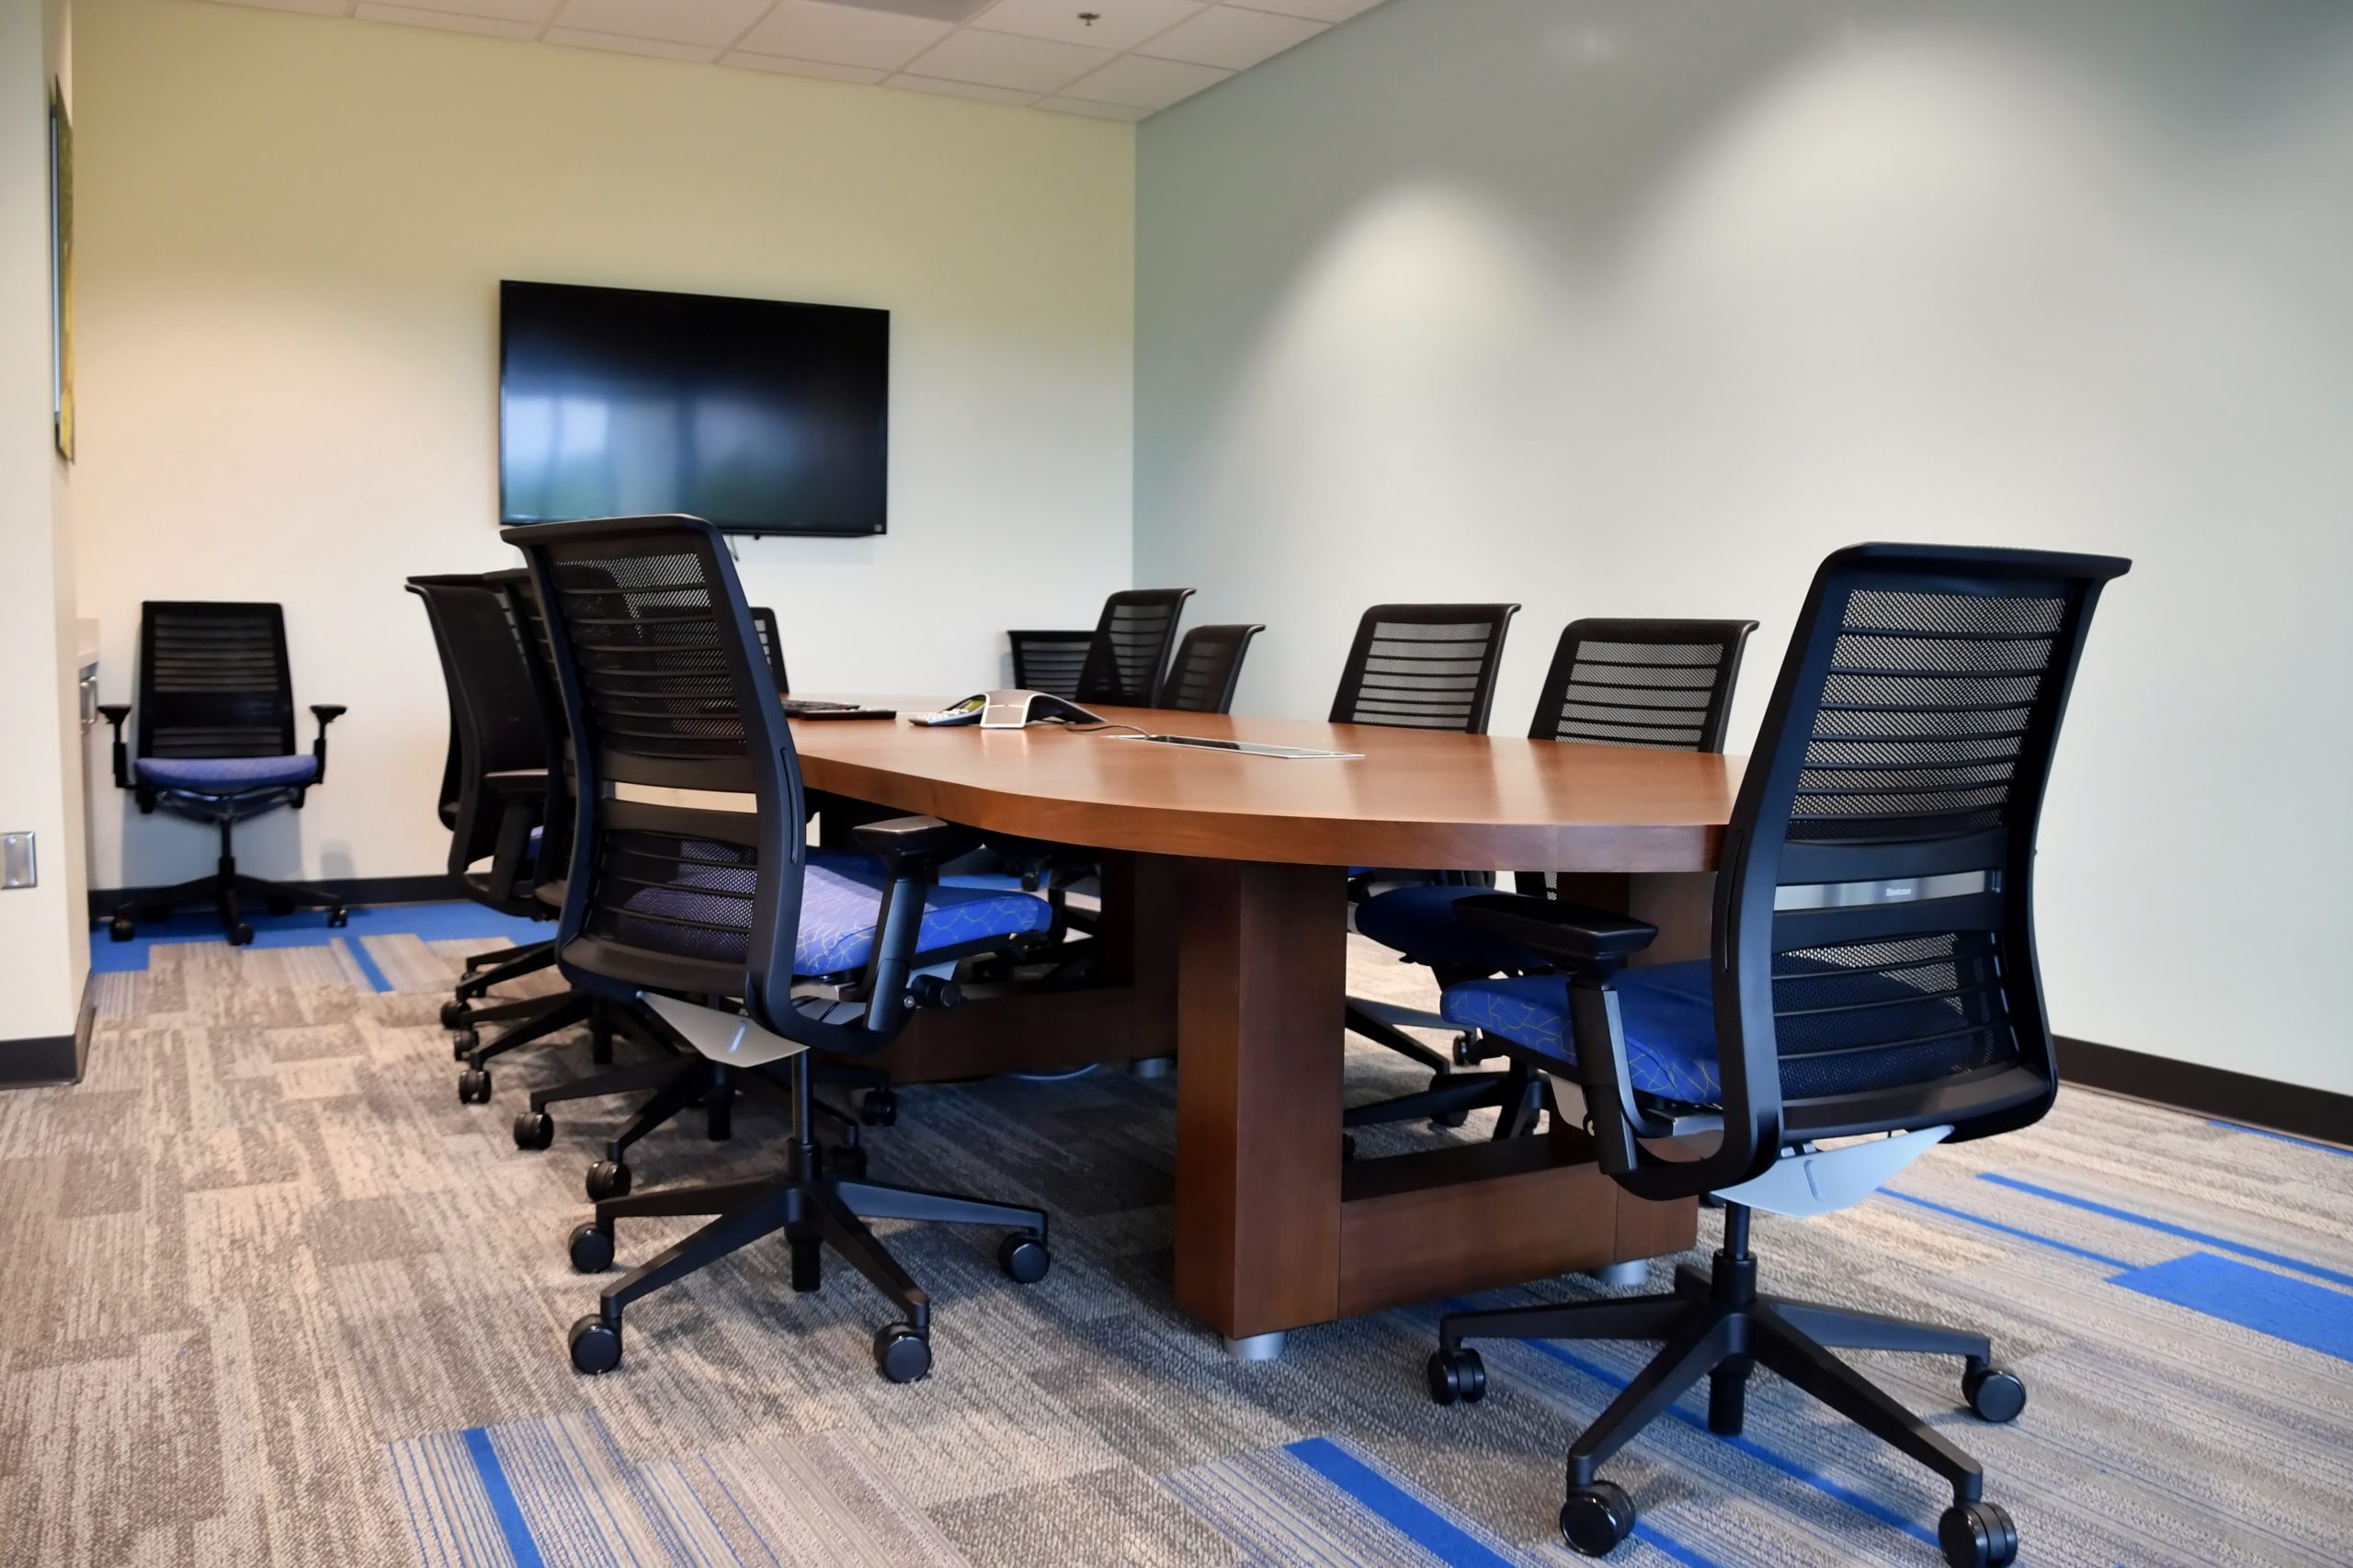 Before investing in meeting room hardware, make sure your choices align with how users will use the room and the business outcomes they need to produce.